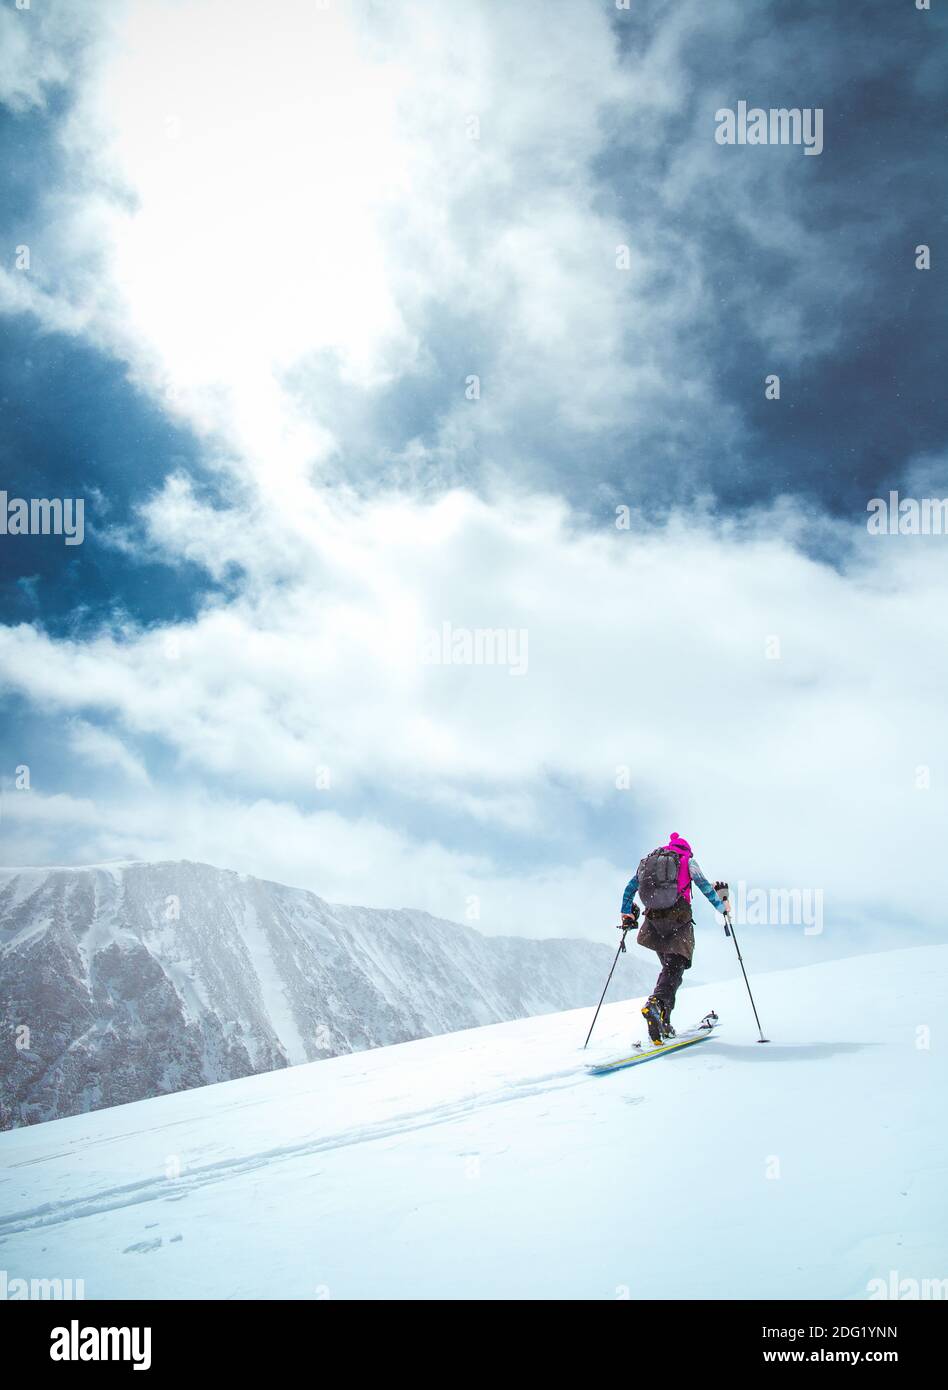 A skier tours up a snowy mountain in Colorado with blue skies Stock Photo